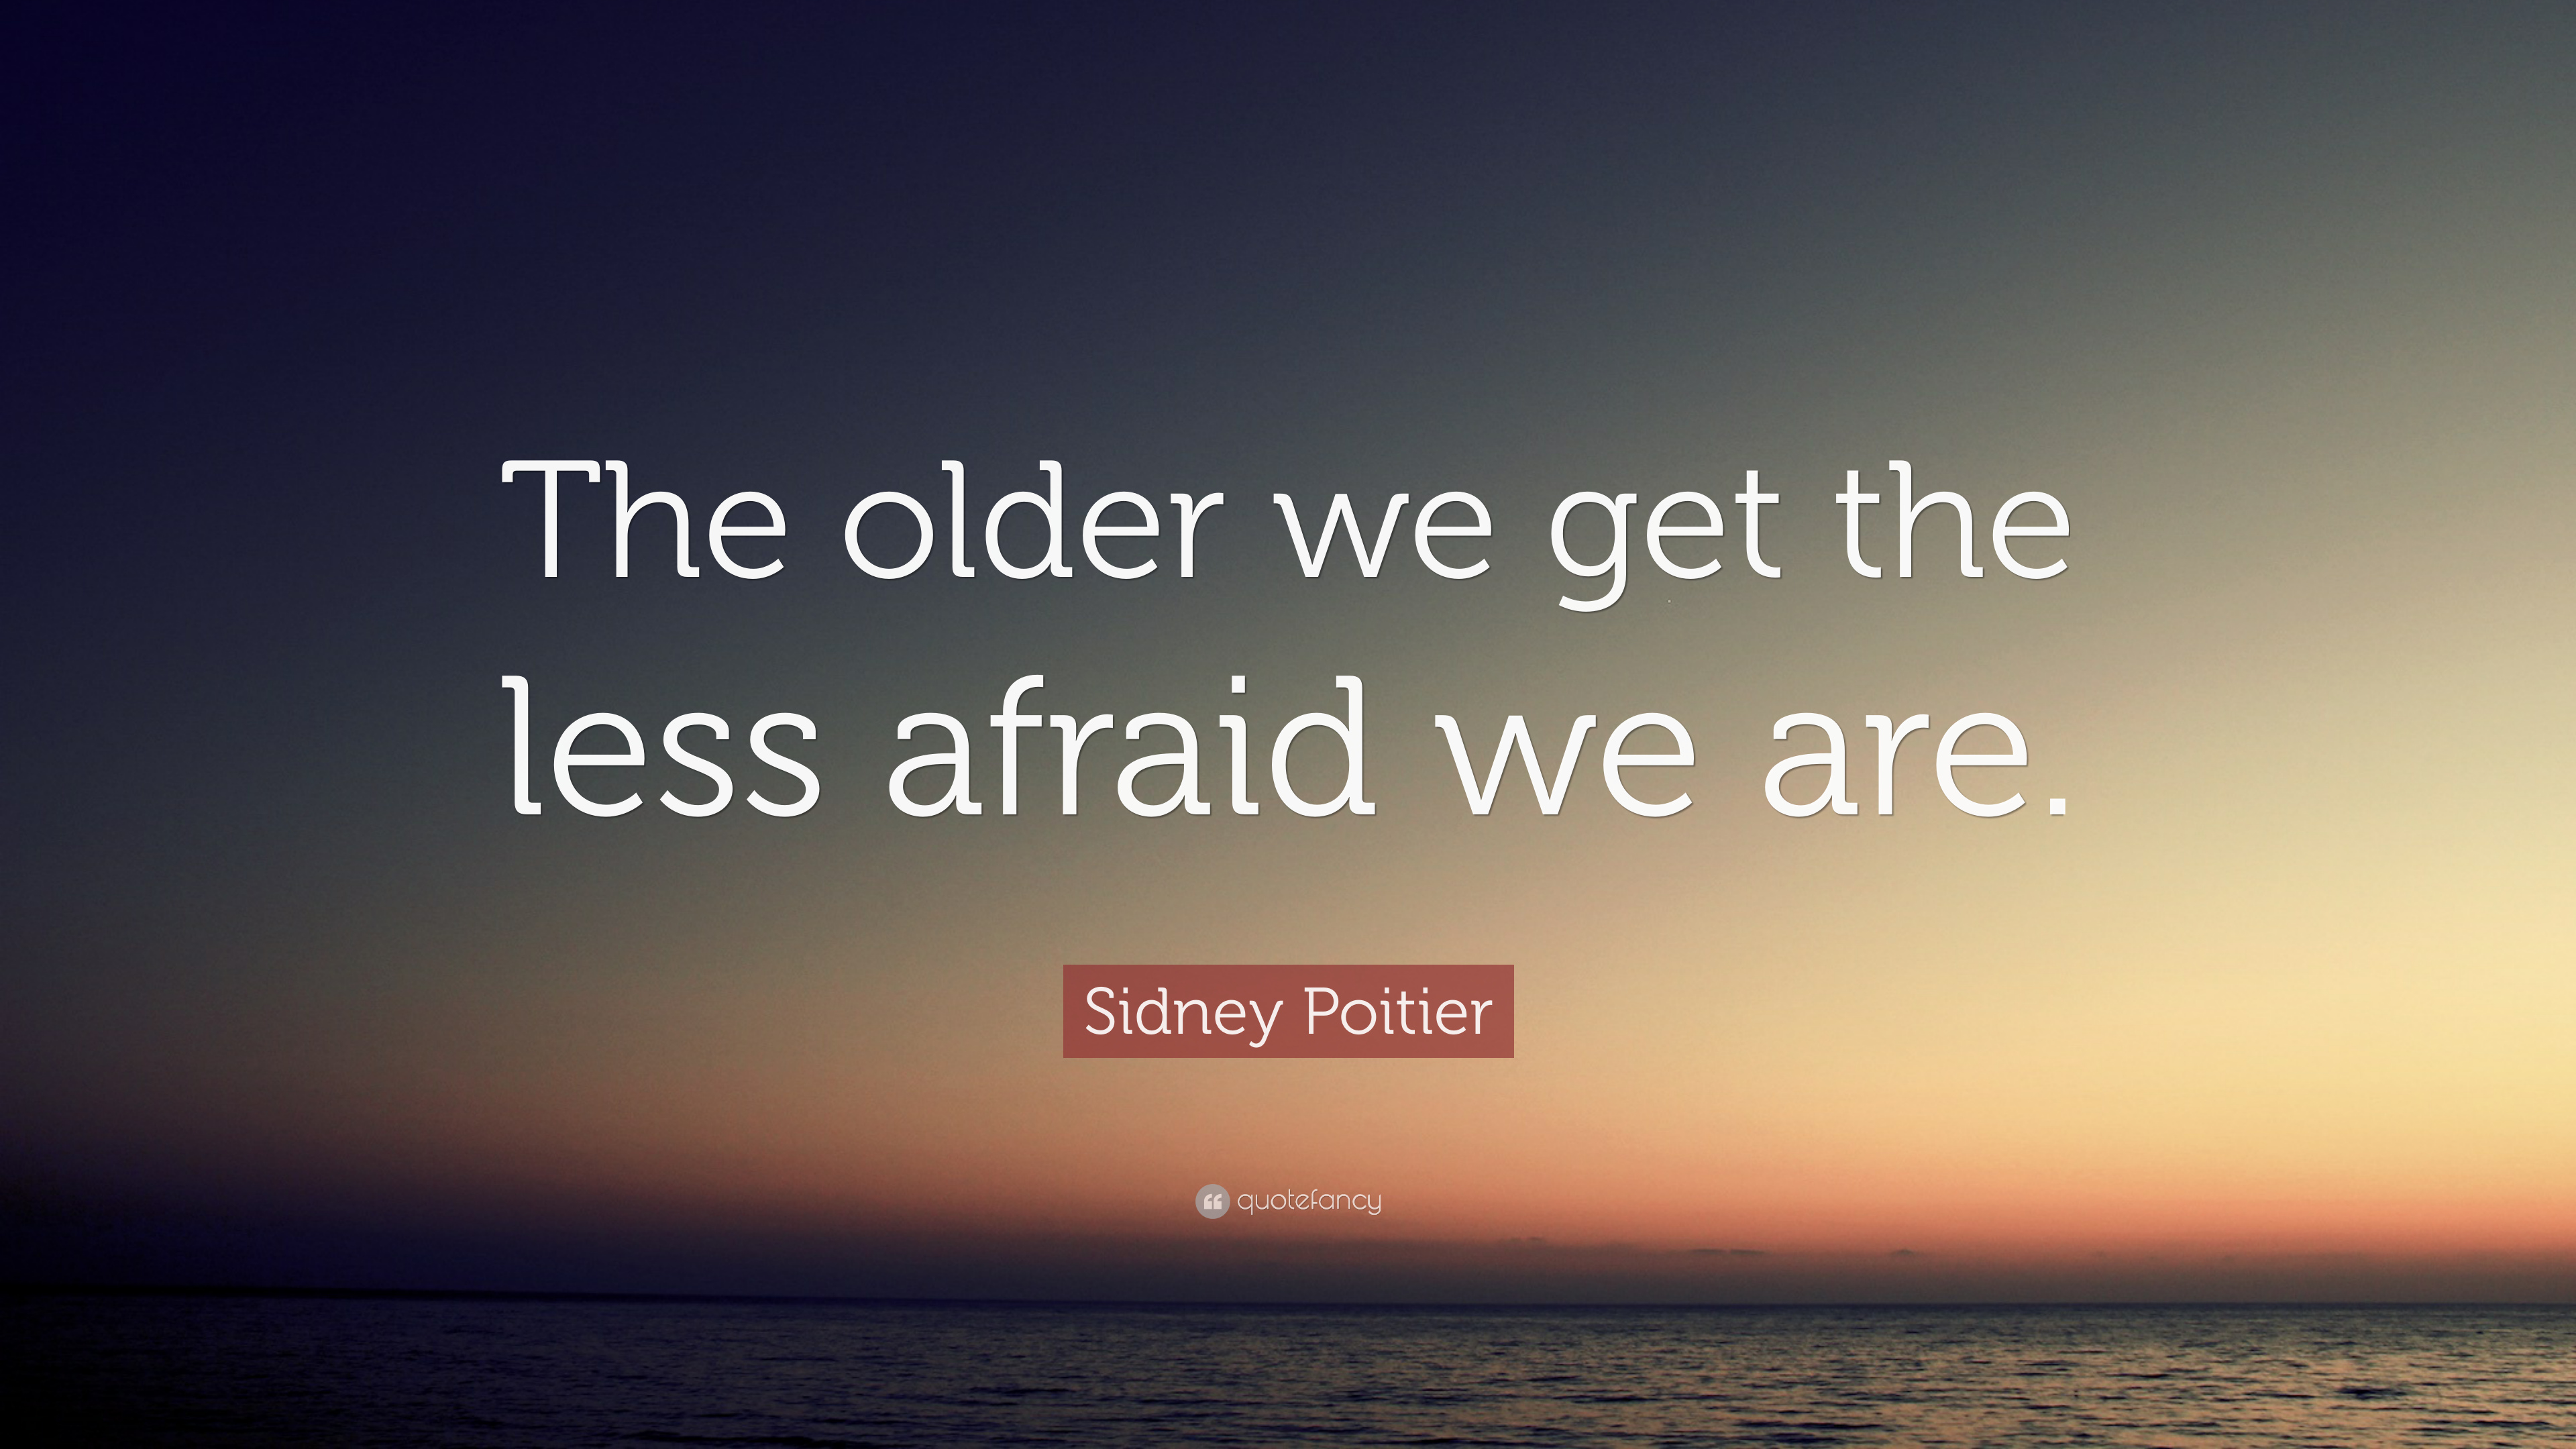 Sidney Poitier Quote: “The older we get the less afraid we are.” 7